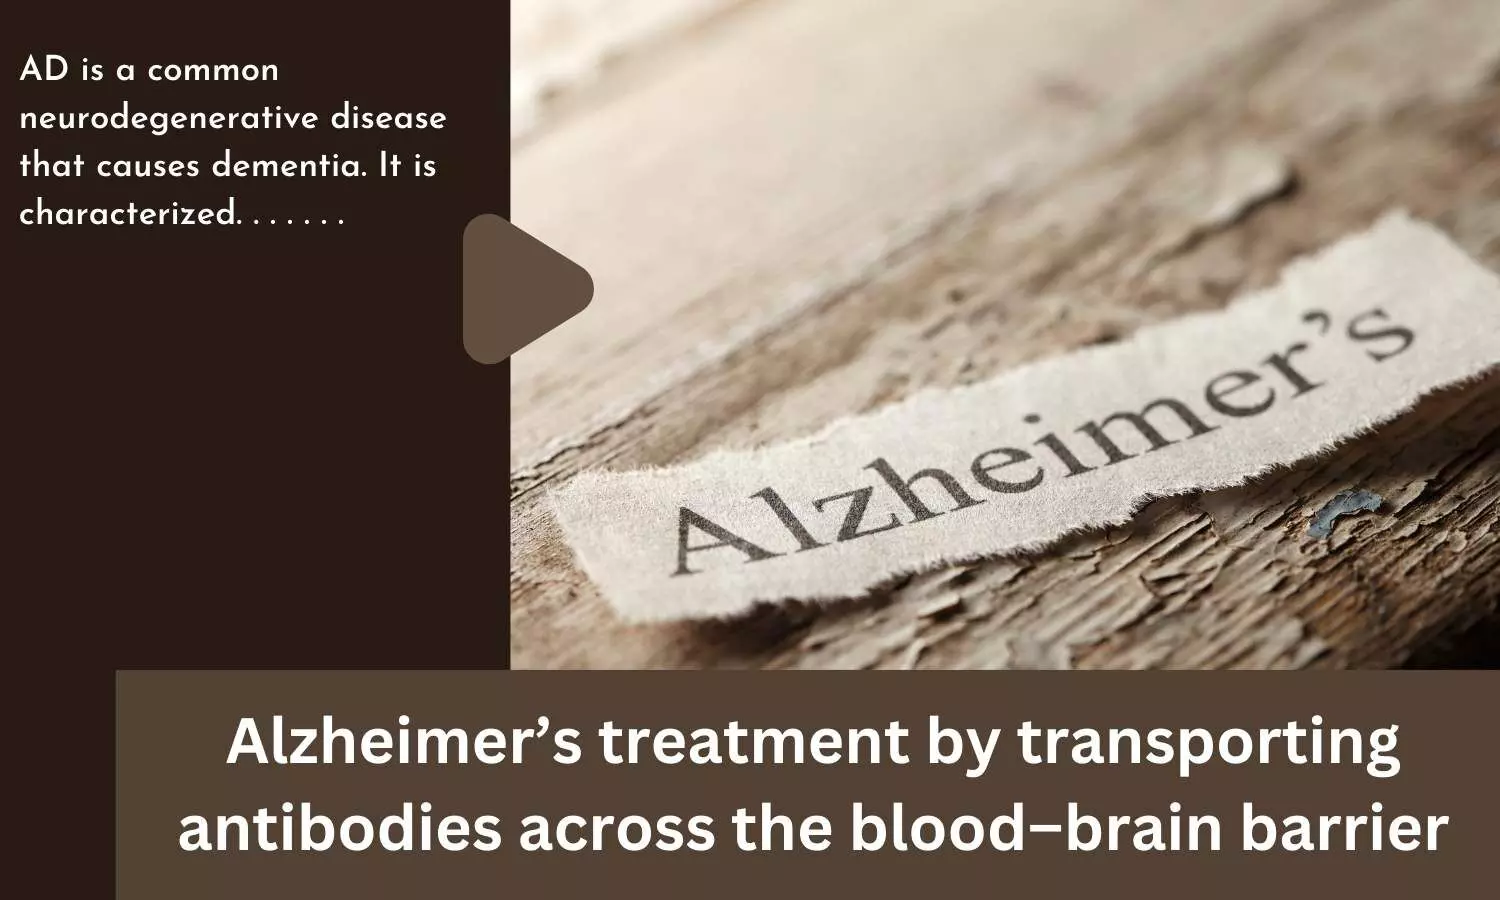 Alzheimers treatment by transporting antibodies across the blood-brain barrier